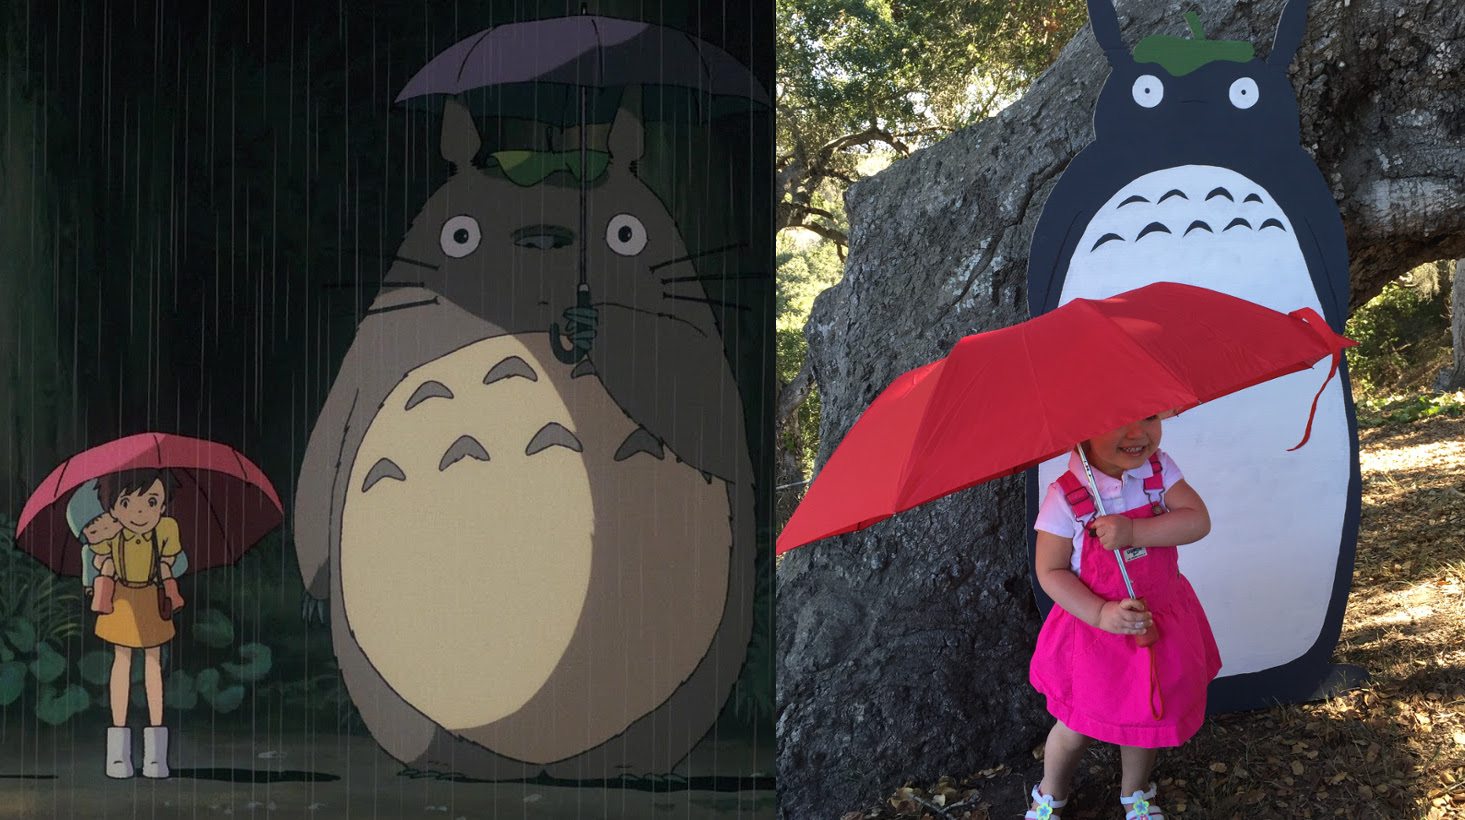 Photo op with Totoro. Photo by Ariane Coffin.